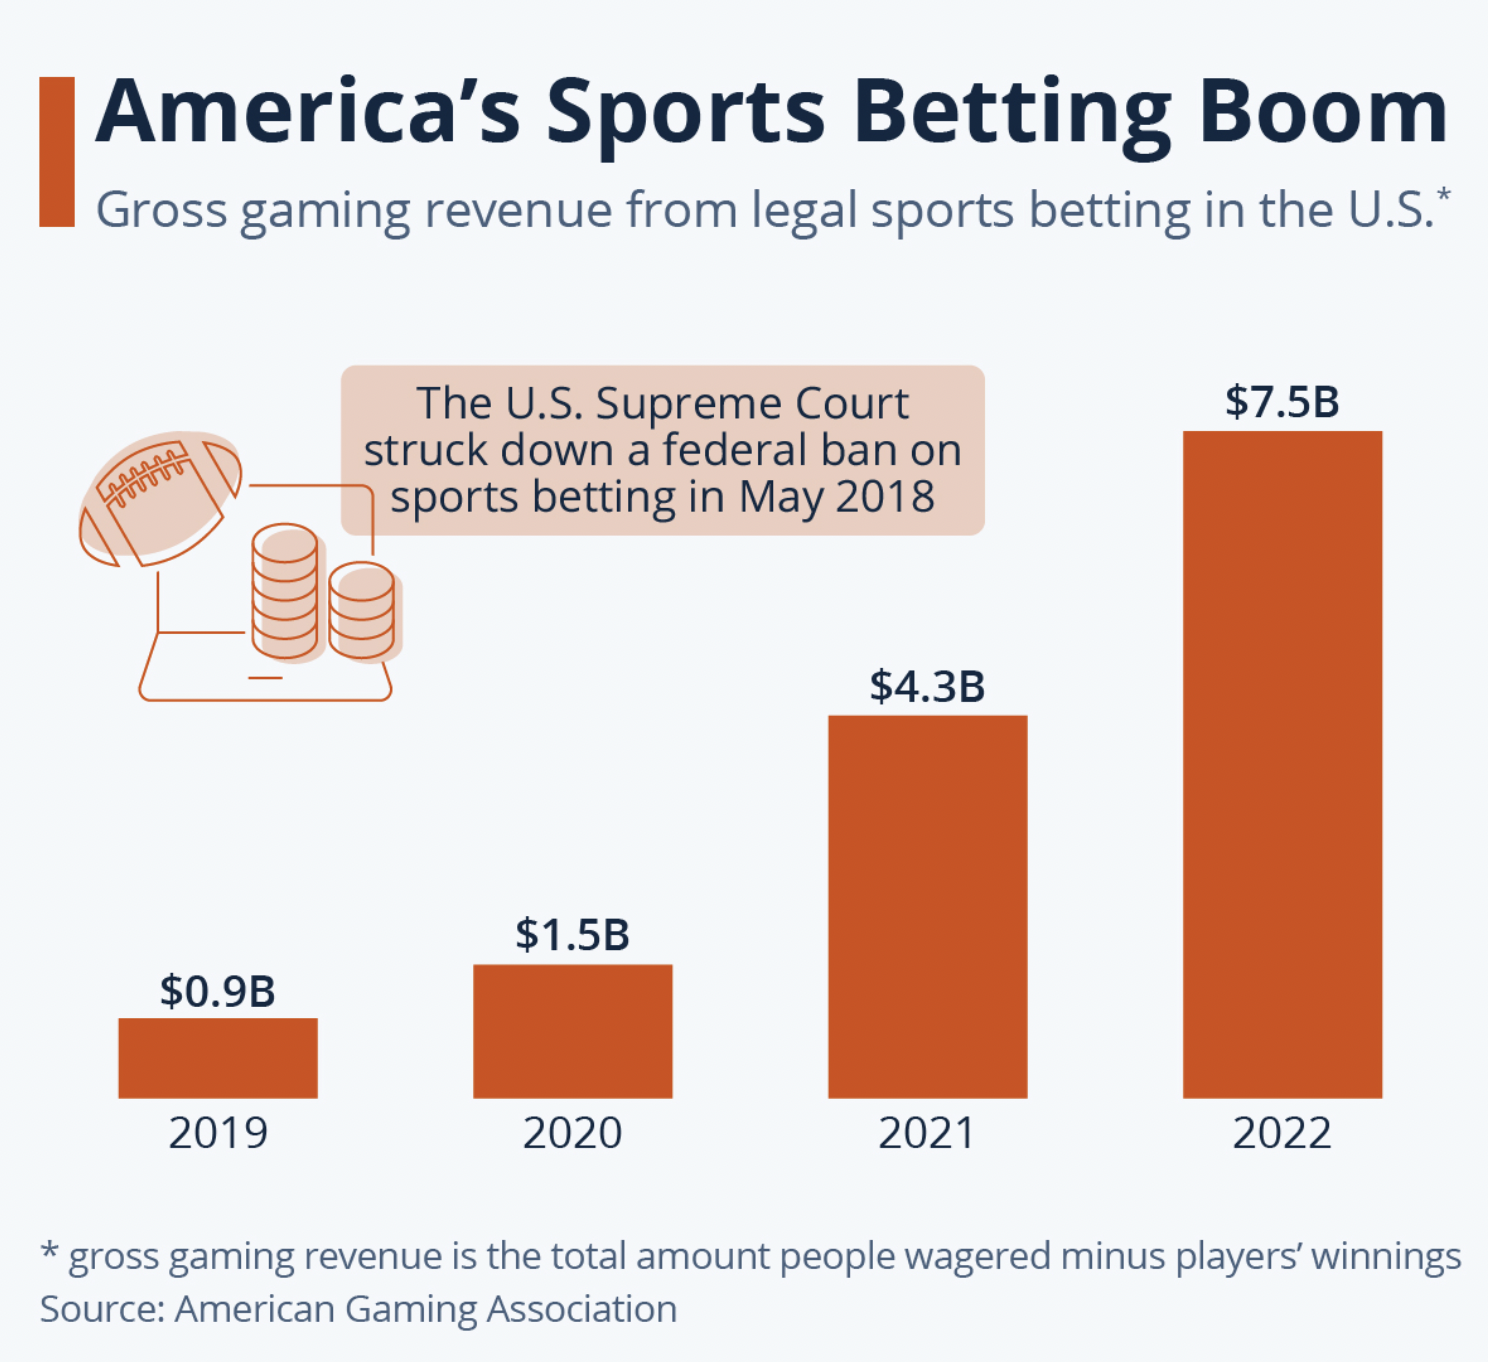 Growth of Sports Betting